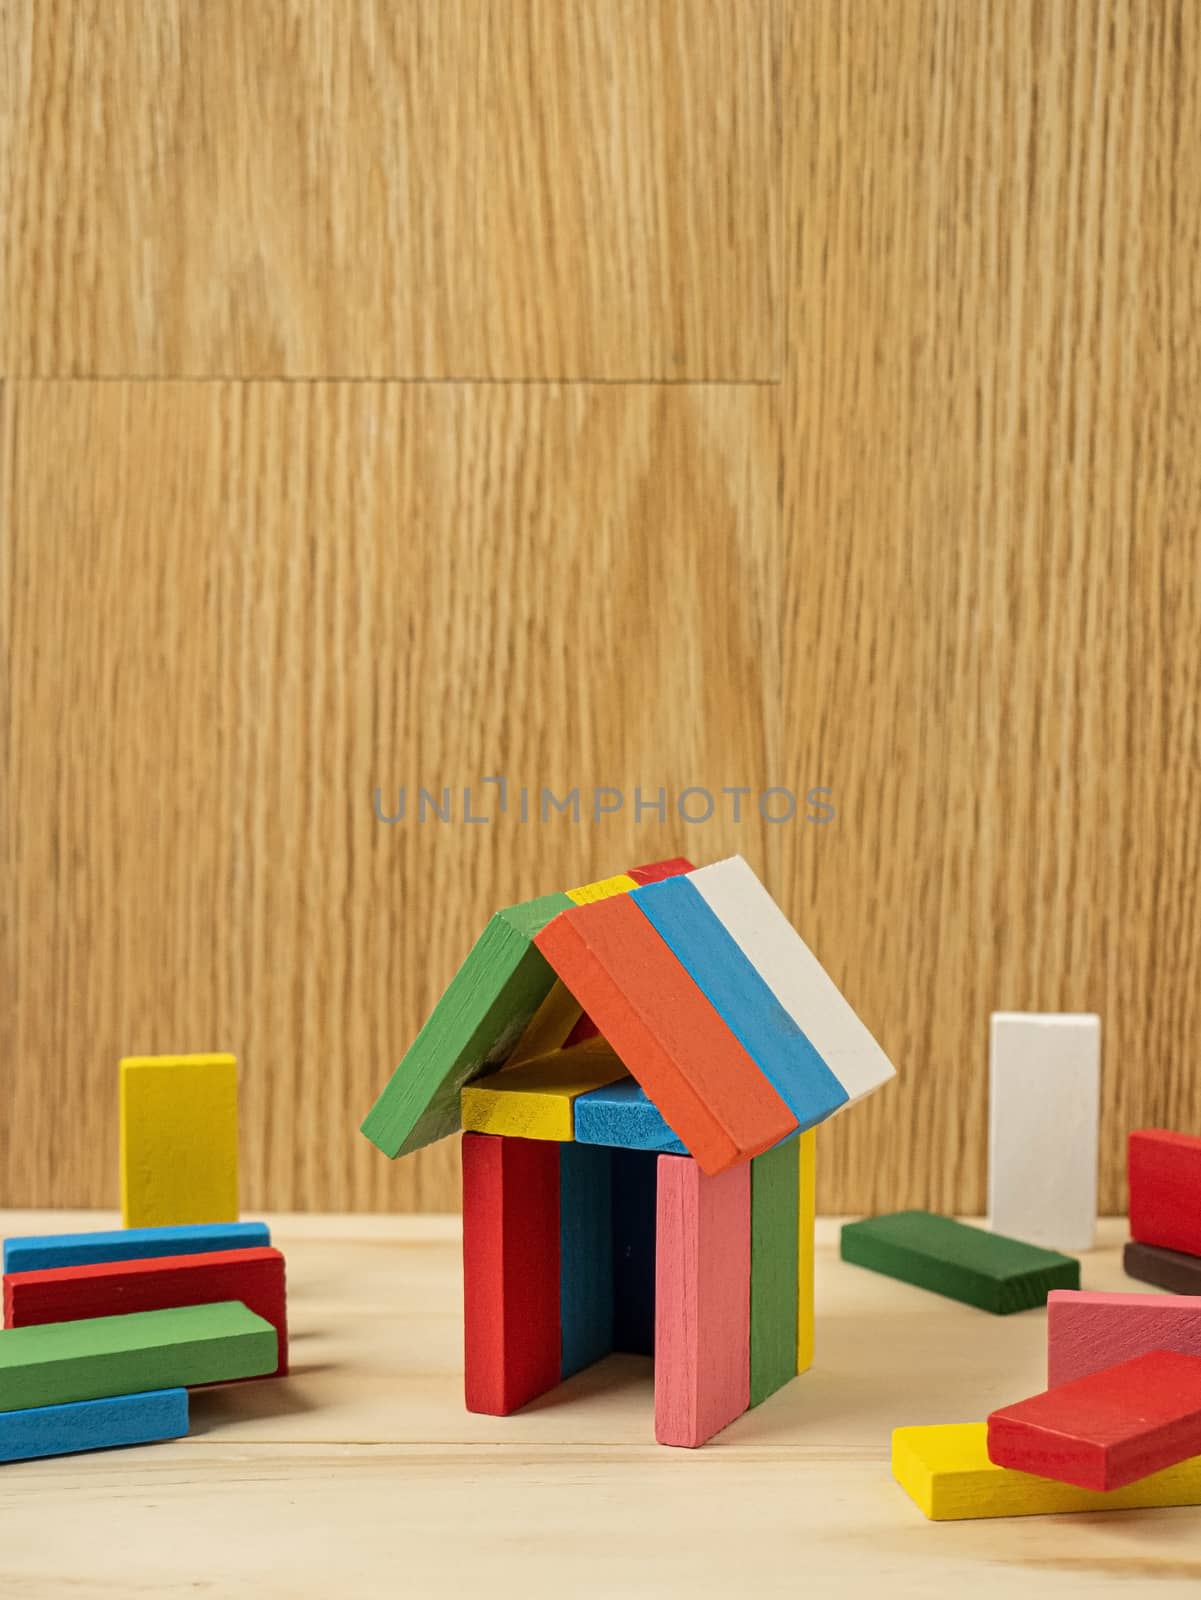 The home wood toy multi colour  for property and building conten by Niphon_13